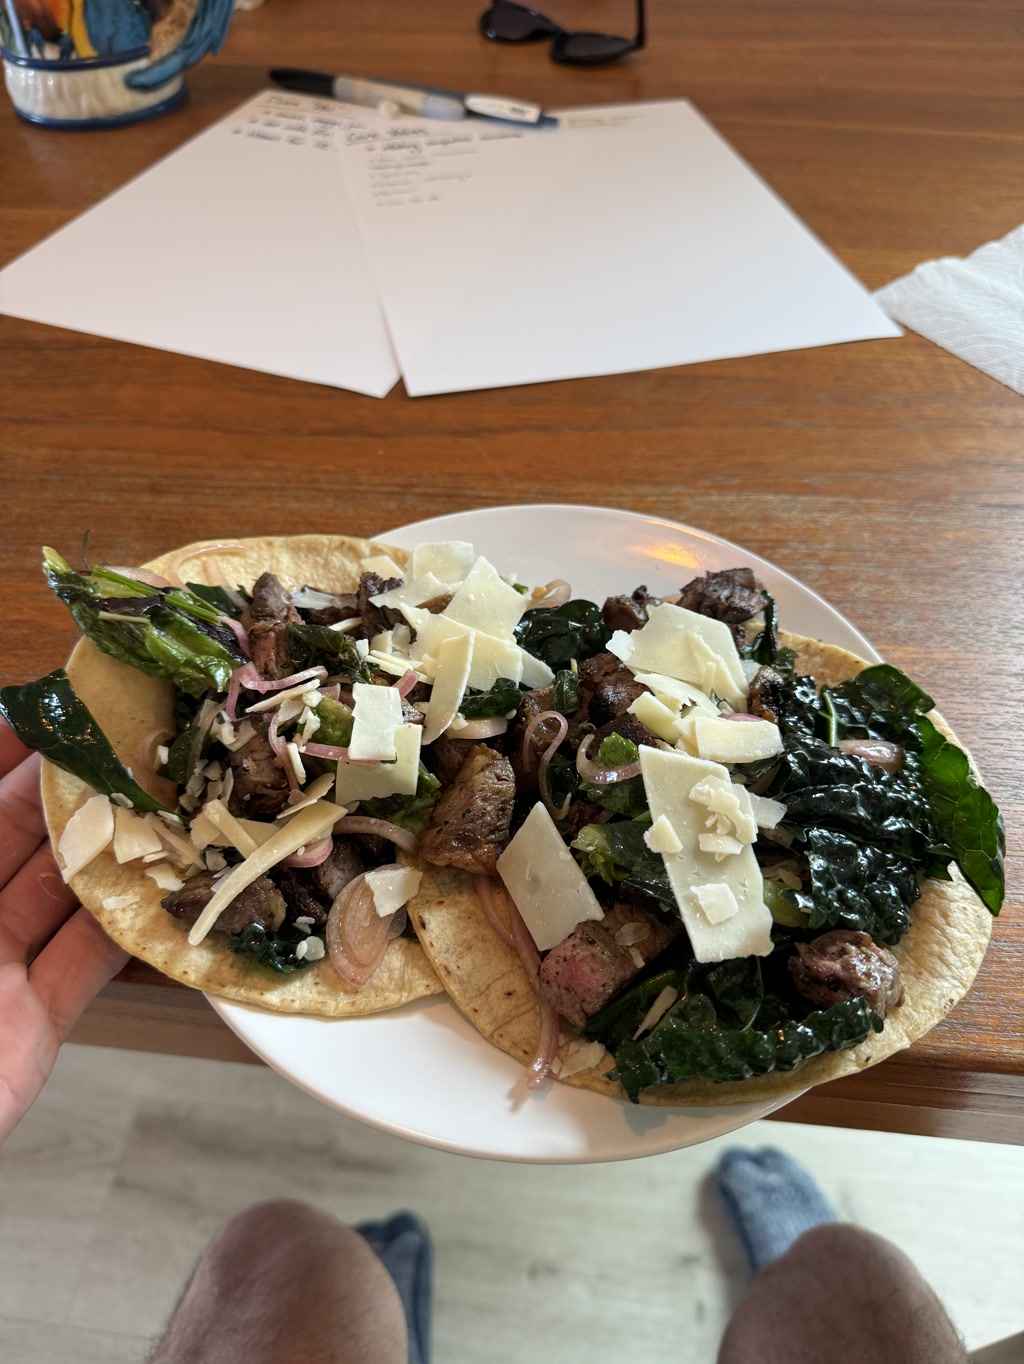 A plate is presented with what appears to be two open-faced tacos generously topped with slices of grilled steak, sautéed onions, greens, and shaved Parmesan cheese. The tacos rest on light-colored soft tortillas and are piled high with ingredients, suggesting a fresh and hearty meal. In the background, a wooden table surface is visible with two blank papers, a pen, and a pair of sunglasses laid out. No readable text is discernible.